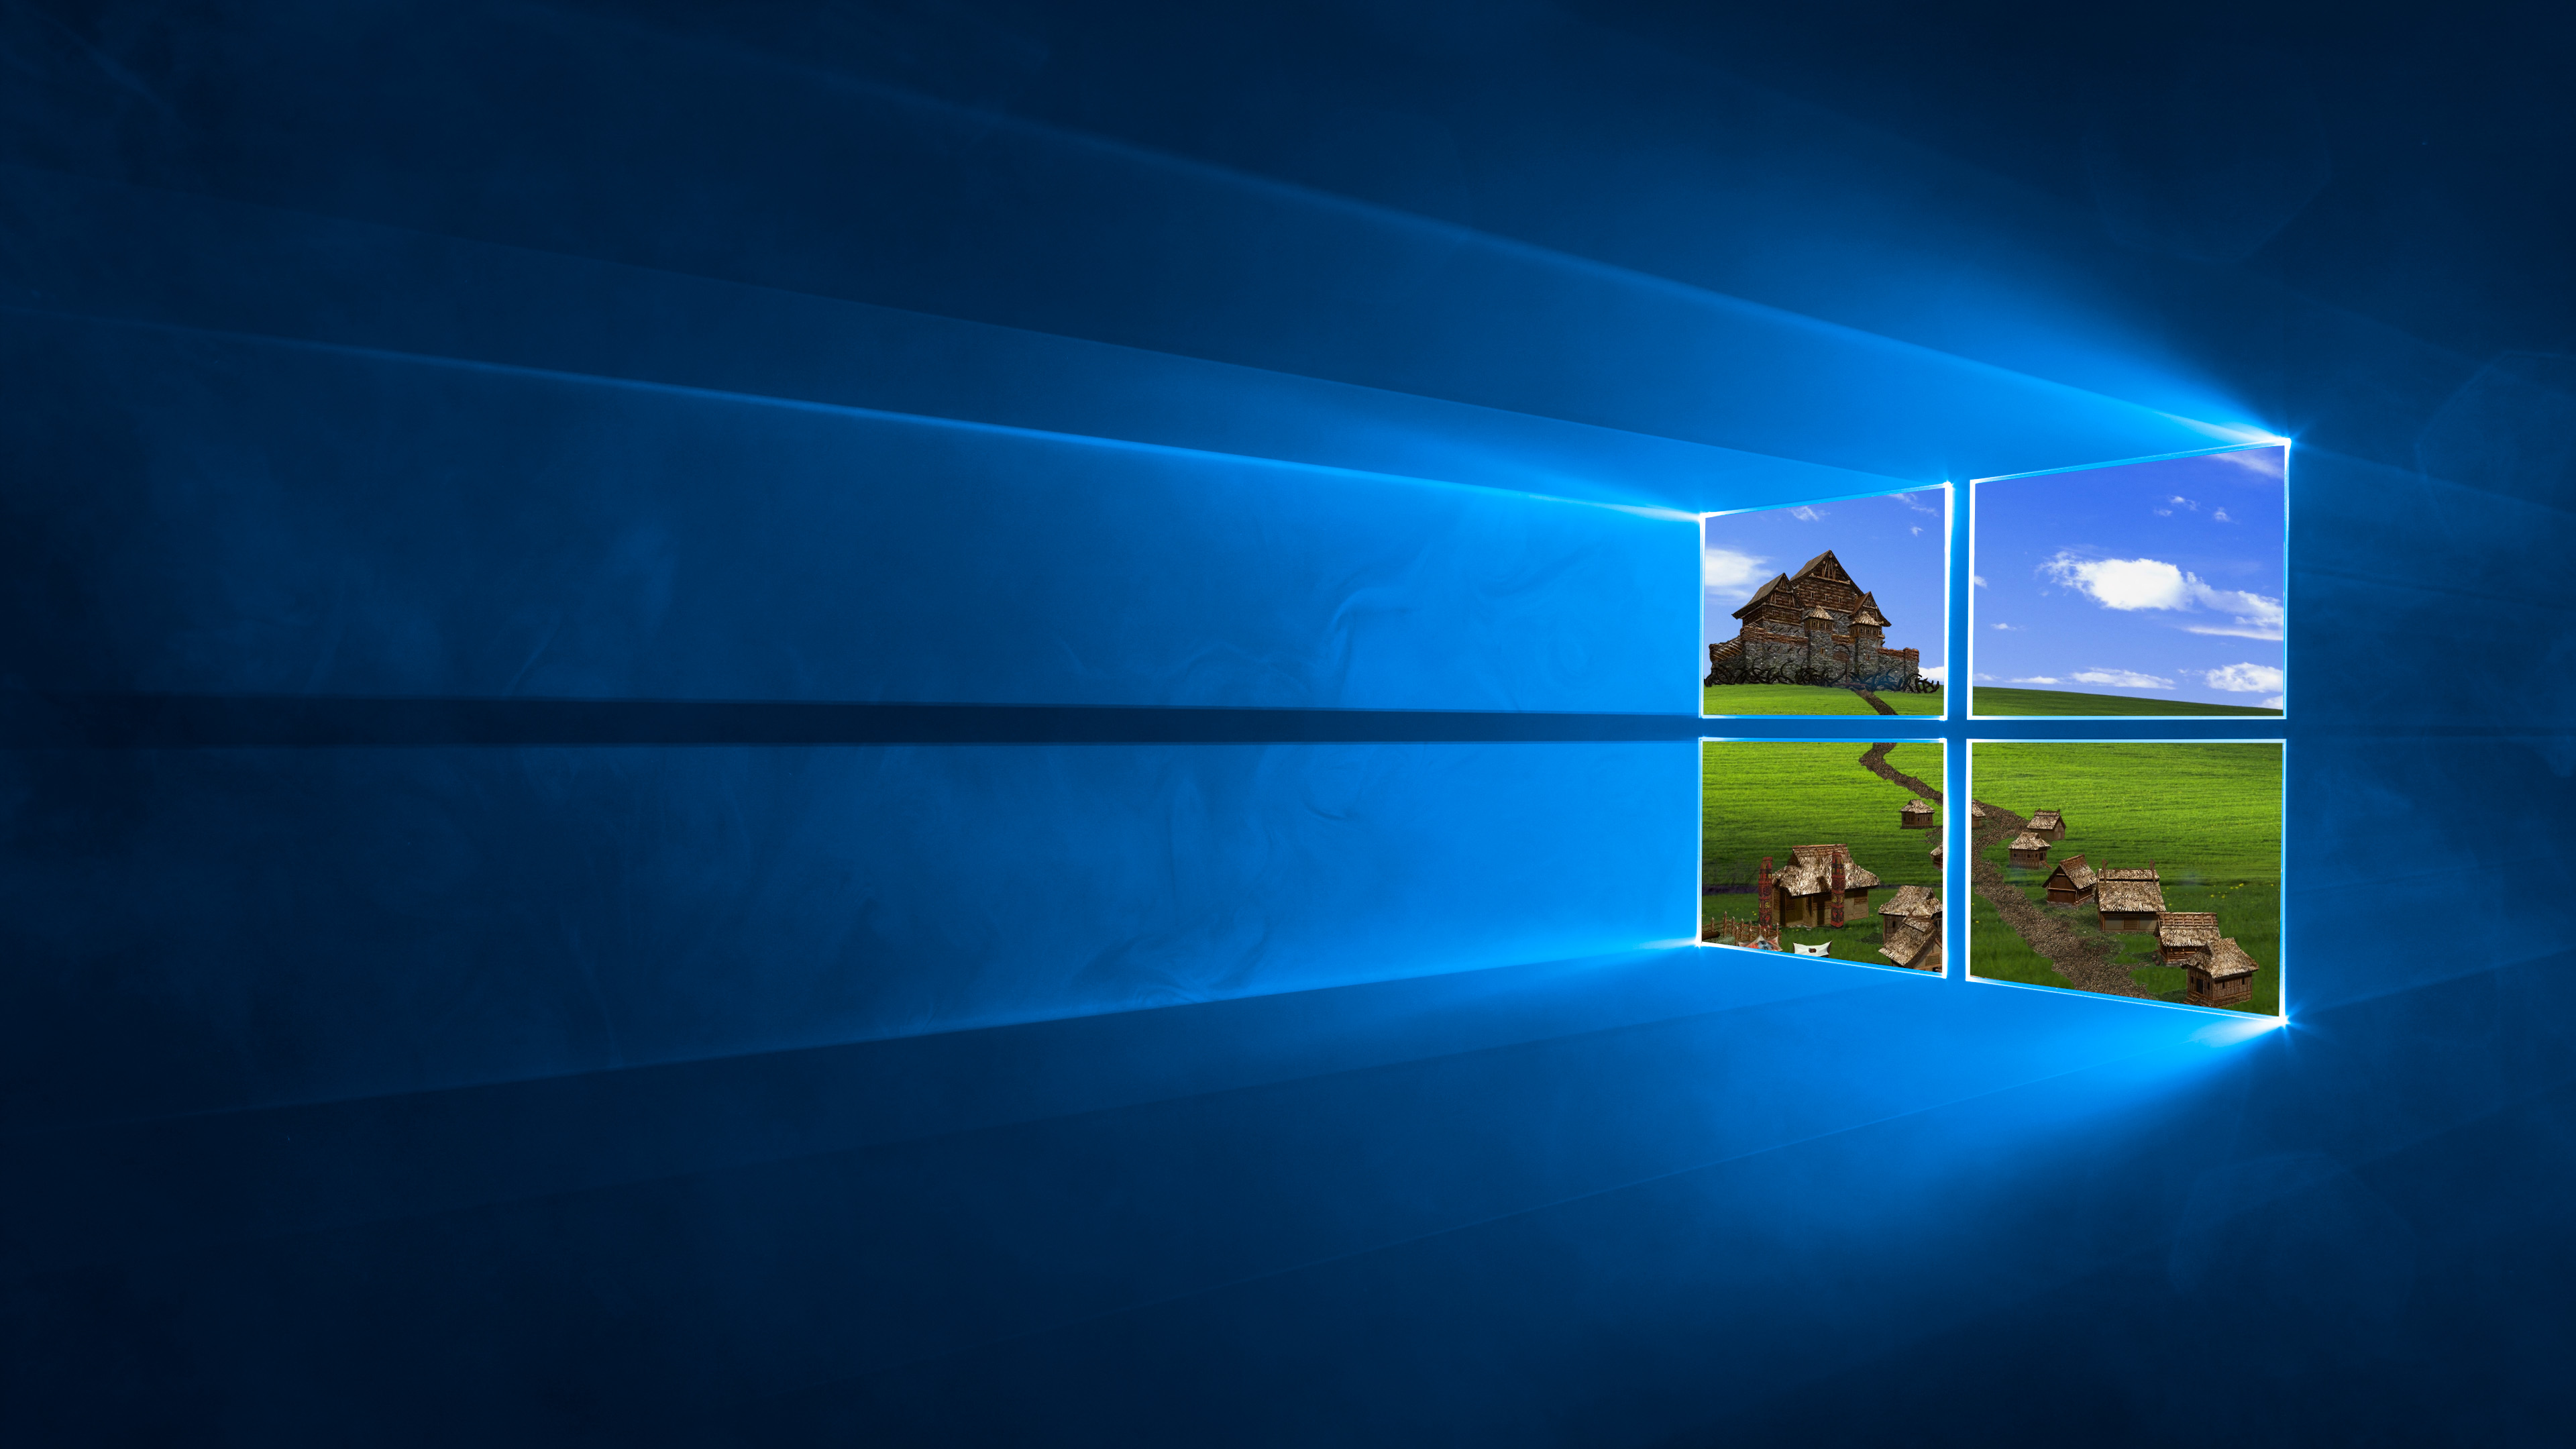 4K, Windows landscape, Microsoft, Heroes of Might and Magic, Windows XP Gallery HD Wallpaper